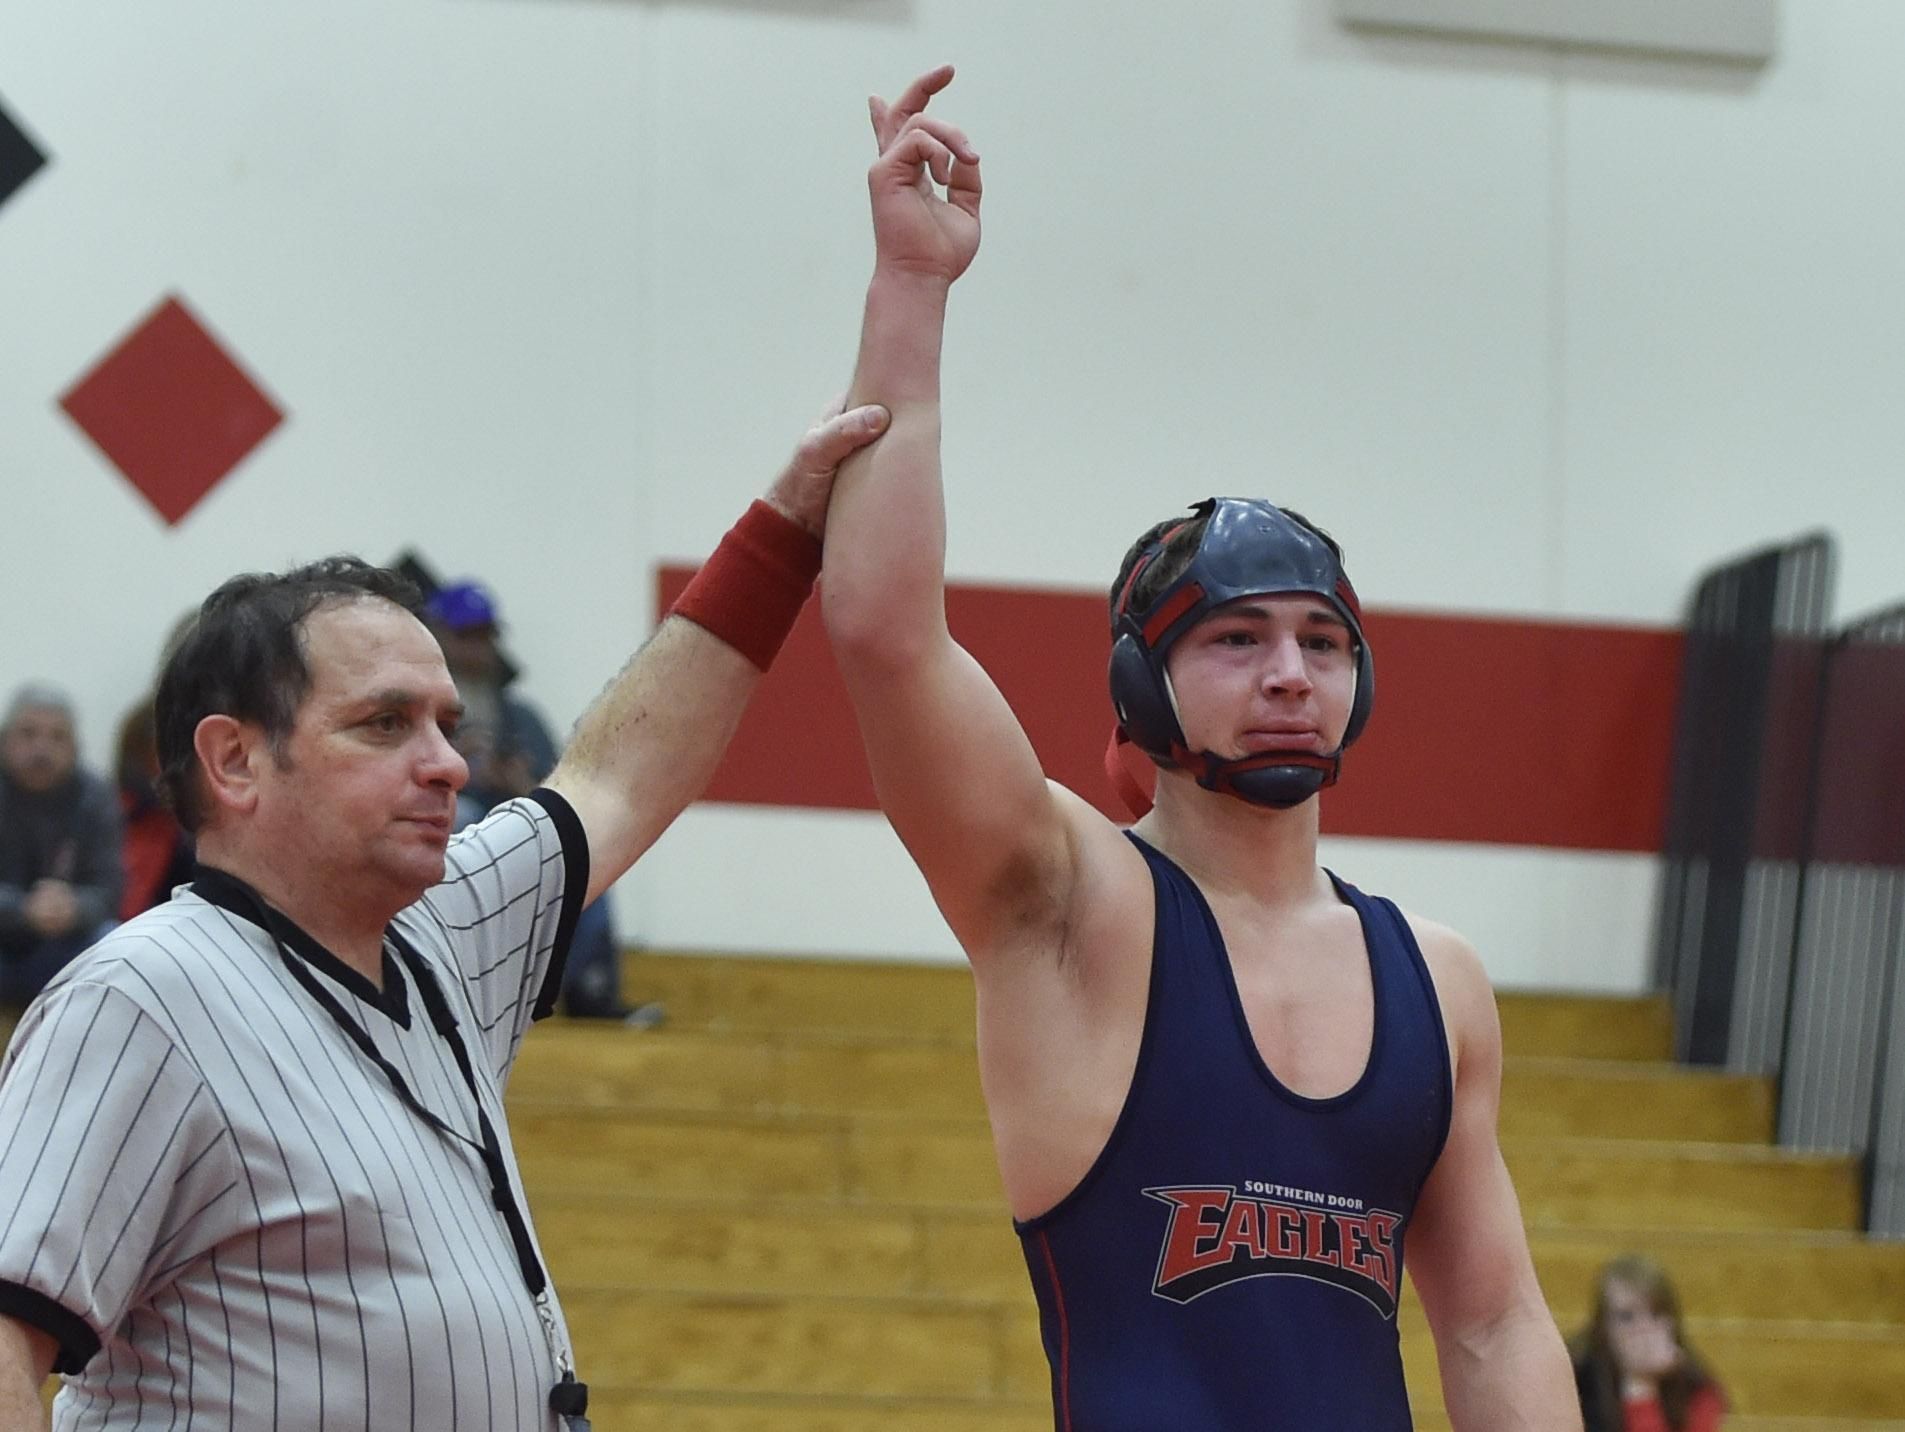 Southern Door’s Michael Bertrand won seven tournament titles, placed third at state and finished his senior season with a record of 45-4 en route to being named Packerland Conference Wrestler of the Year.